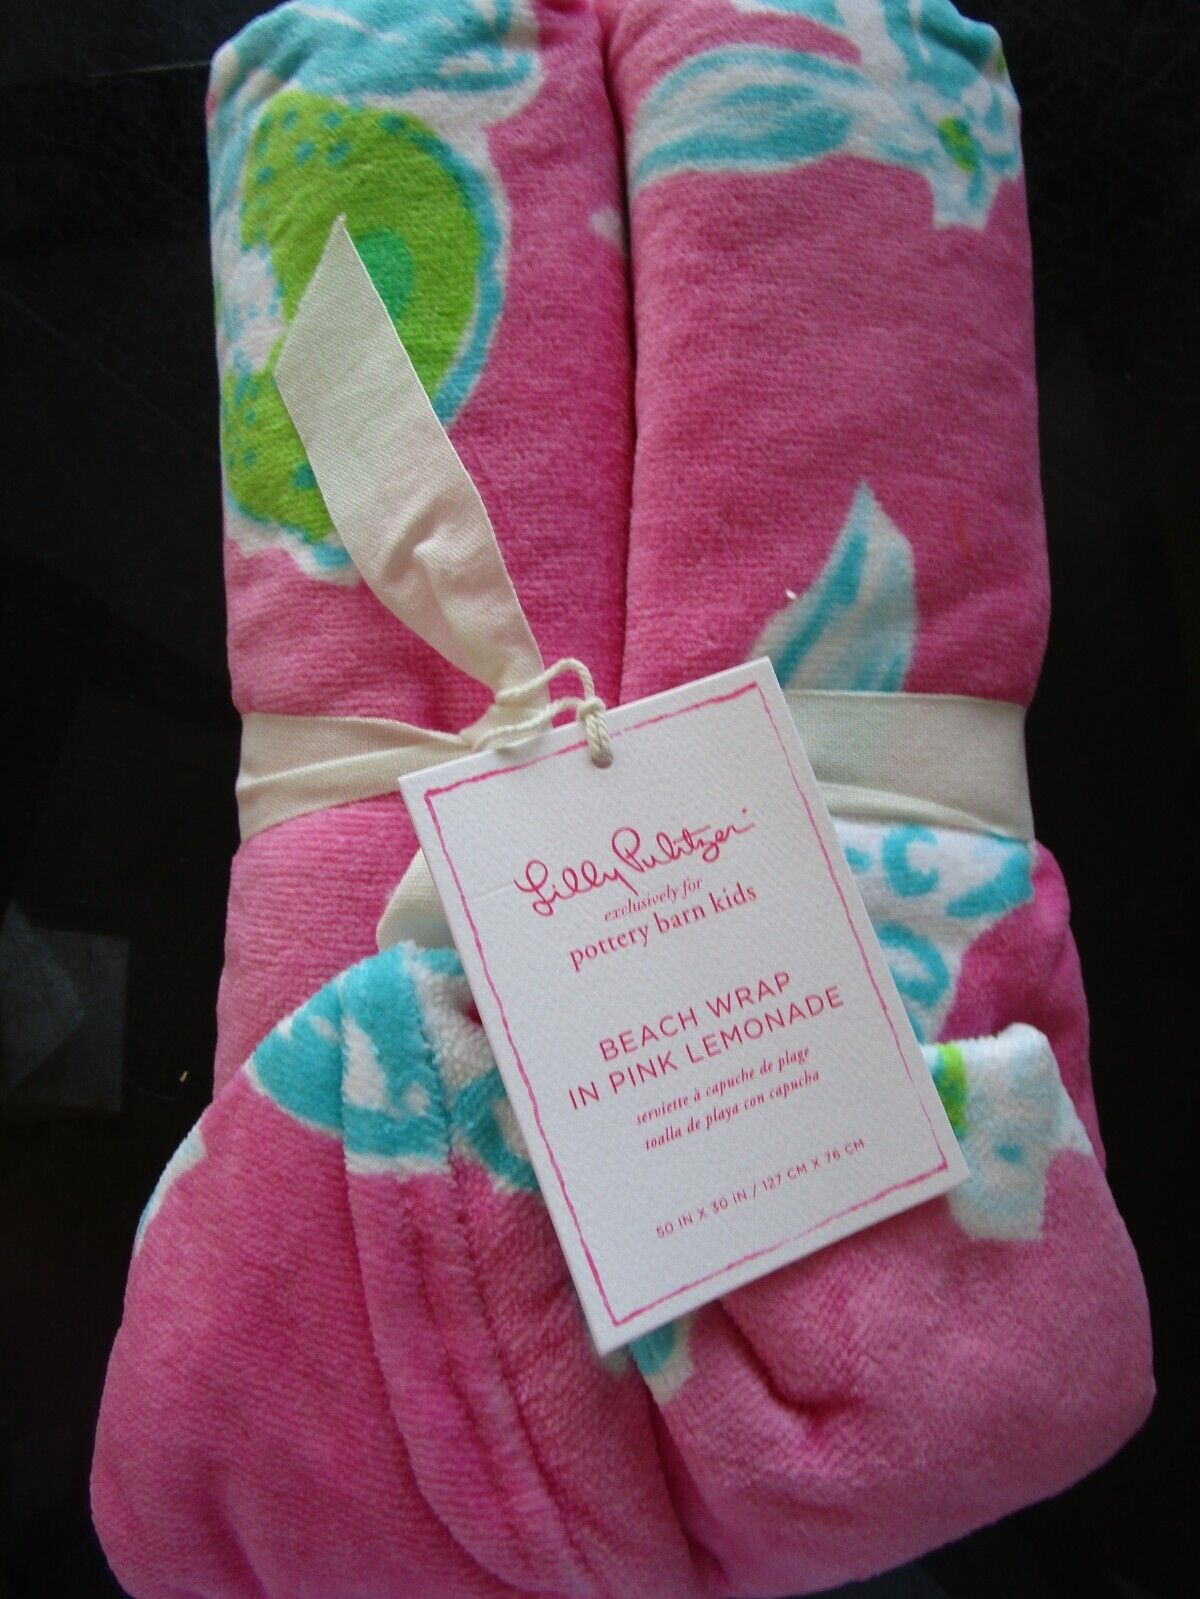 Pottery Barn Kids Lily Pulitzer Beach Wrap Towel Pink Lemonade New With Tags